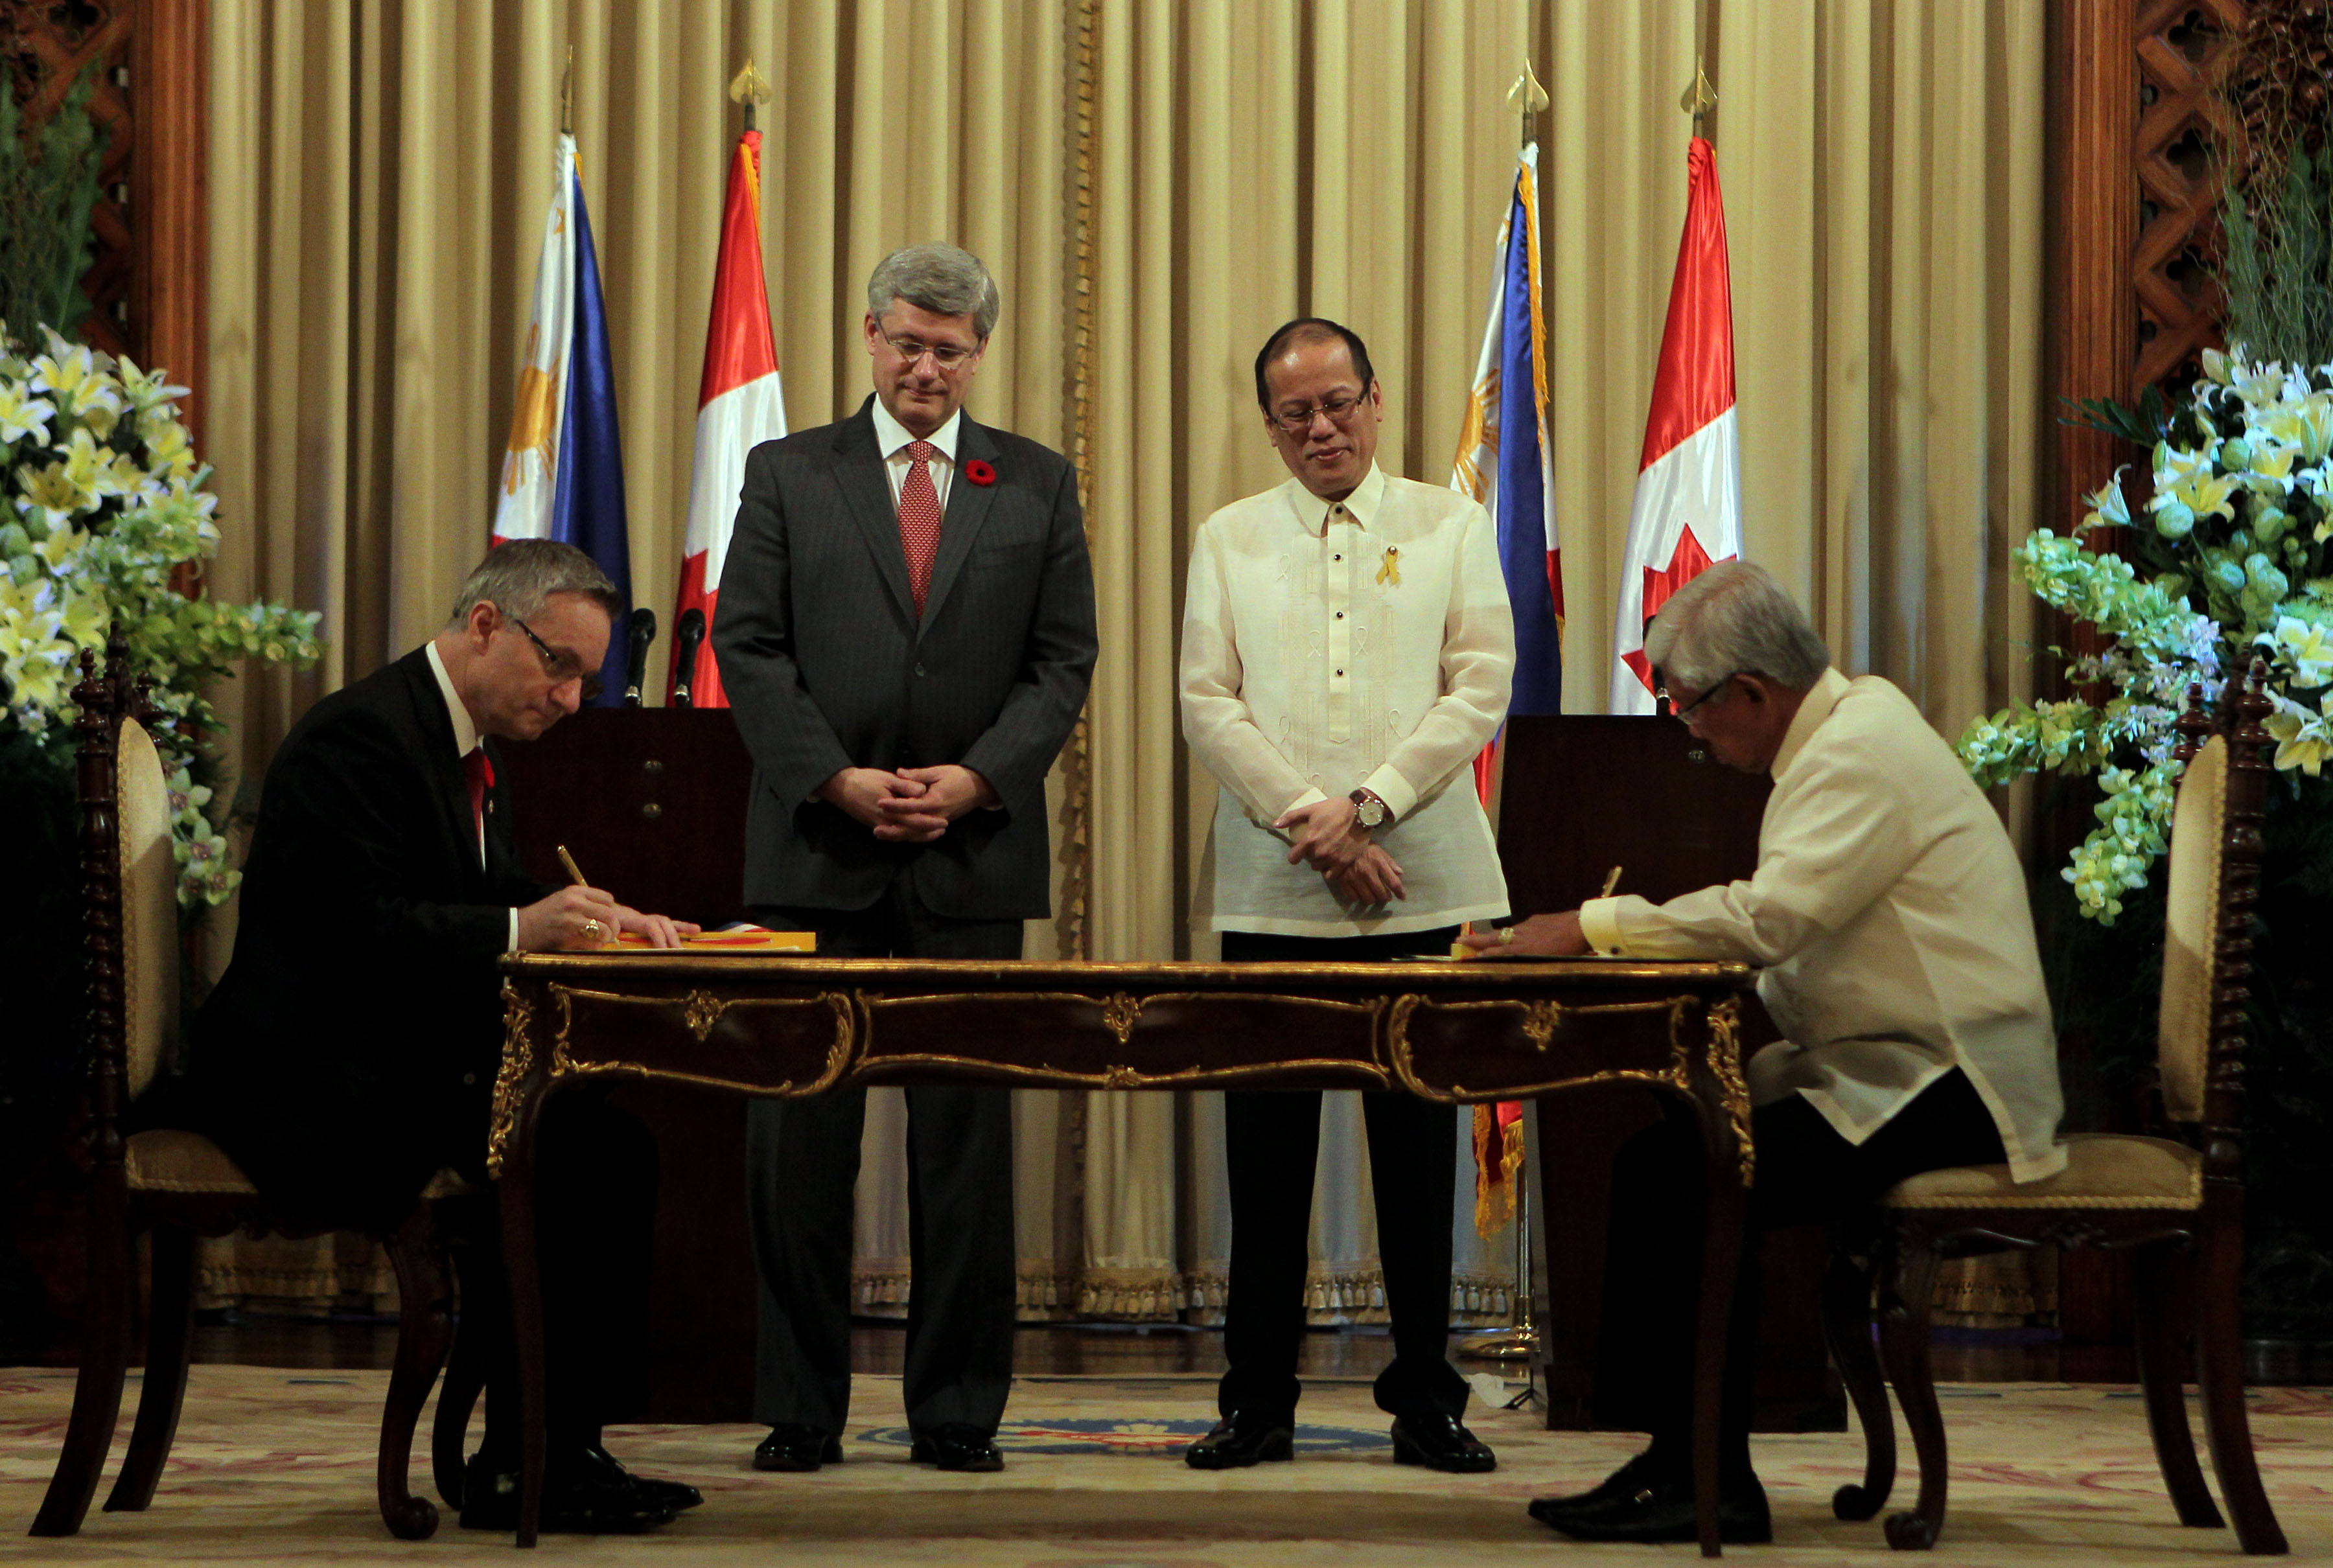 PROCUREMENT DEAL. President Benigno S. Aquino III and The Right Honourable Stephen Harper, Prime Minister of Canada, witnessed as Defense Secretary Voltaire Gazmin and Canadian Minister for International Trade Ed Fast signs the Memorandum of Understanding (MOU) between the Philippine Department of National Defense and the Canadian Commercial Cooperation on government-to-government transactions in defense and military-related procurements, at the Reception Hall, Malacañan Palace during his State Visit to the Republic of the Philippines on Saturday, November 10, 2012. Photo by: Benhur Arcayan / Malacañang Photo Bureau